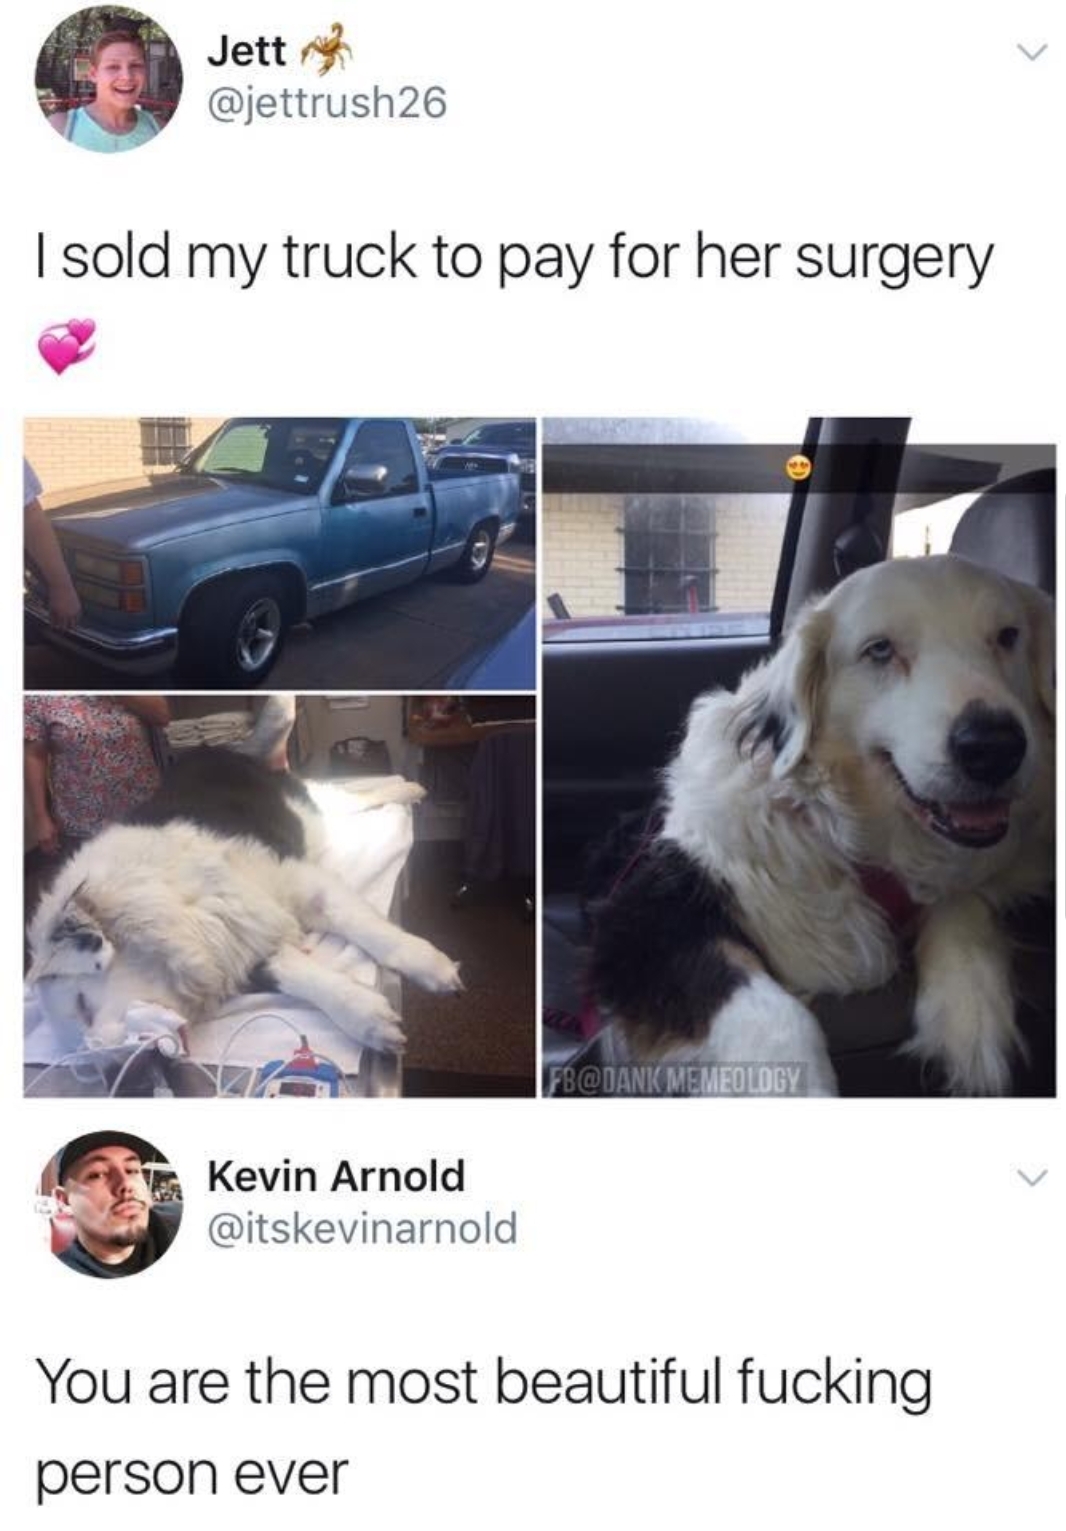 sold my truck for dogs surgery - Jett I sold my truck to pay for her surgery 3GBANI Meme Boy Kevin Arnold You are the most beautiful fucking person ever